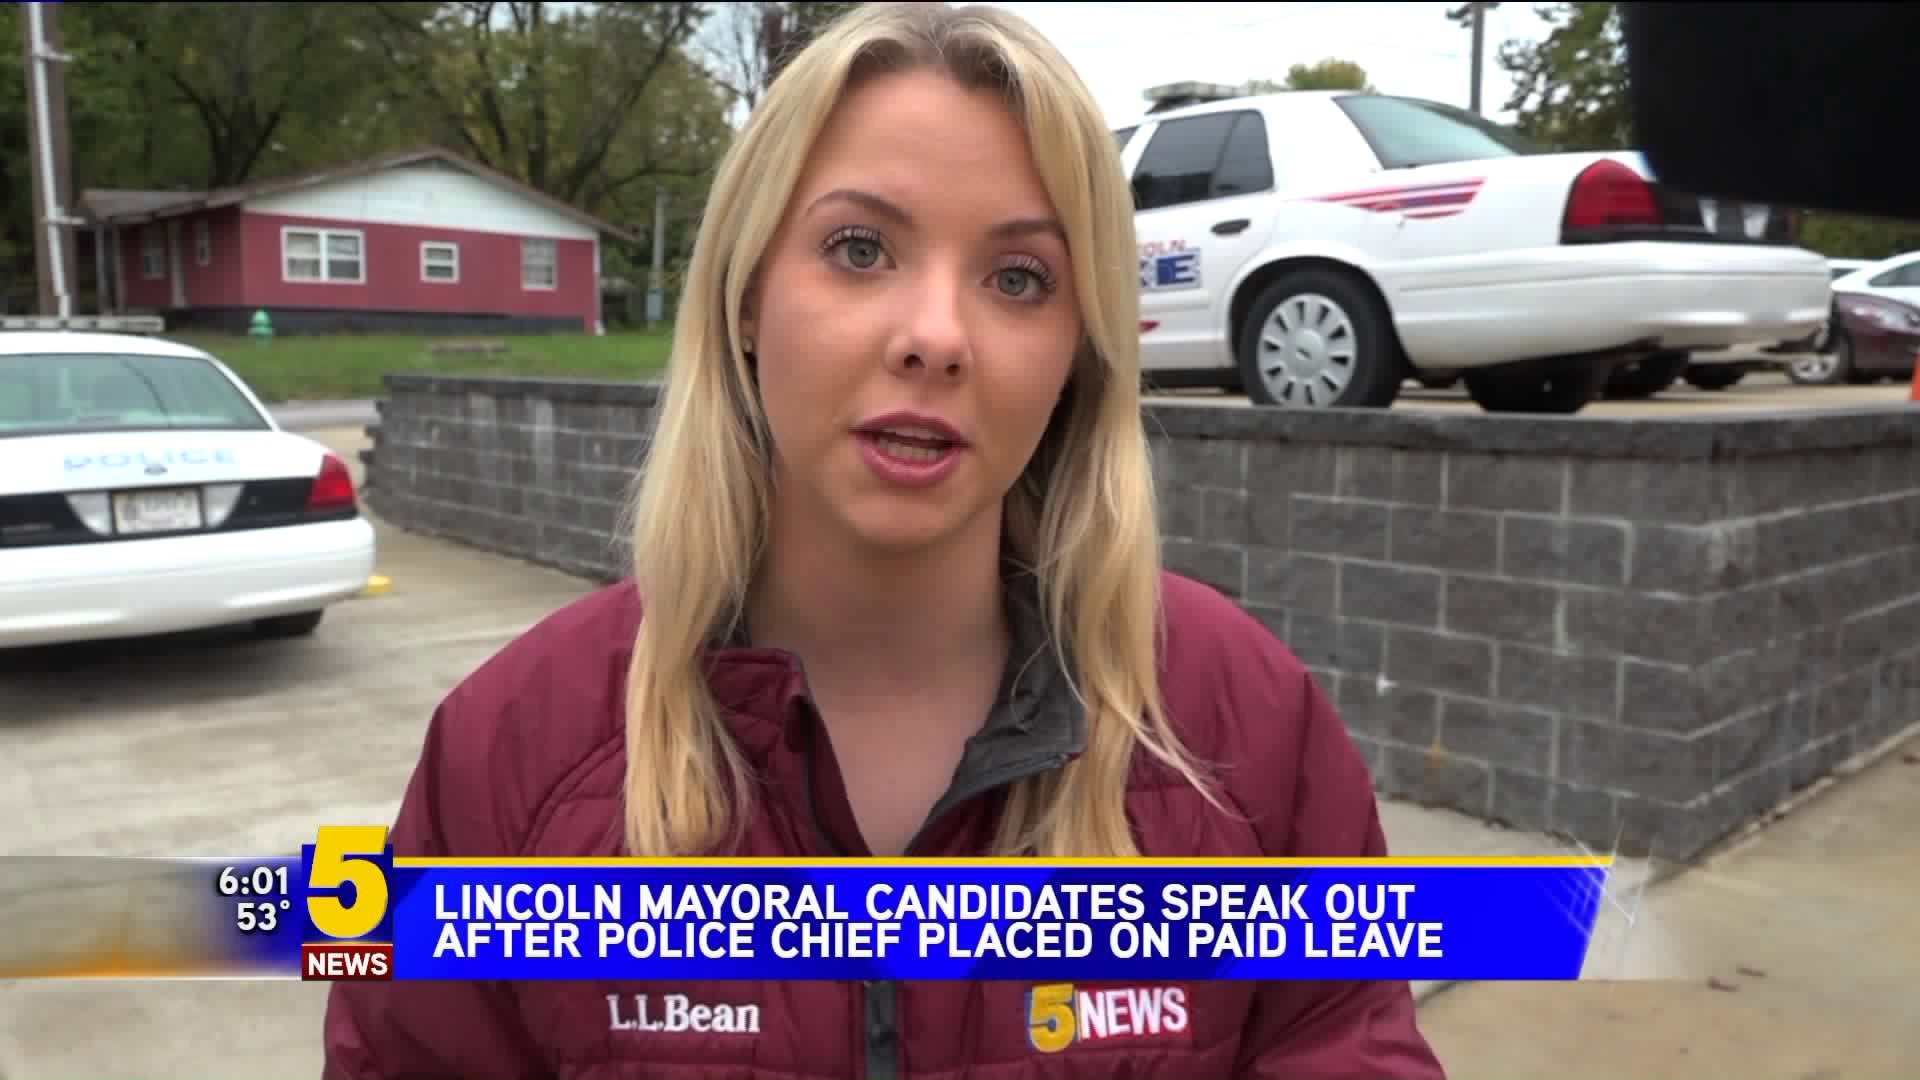 Lincoln Mayor Candidates Speak Out After Police Chief Placed On Paid Leave